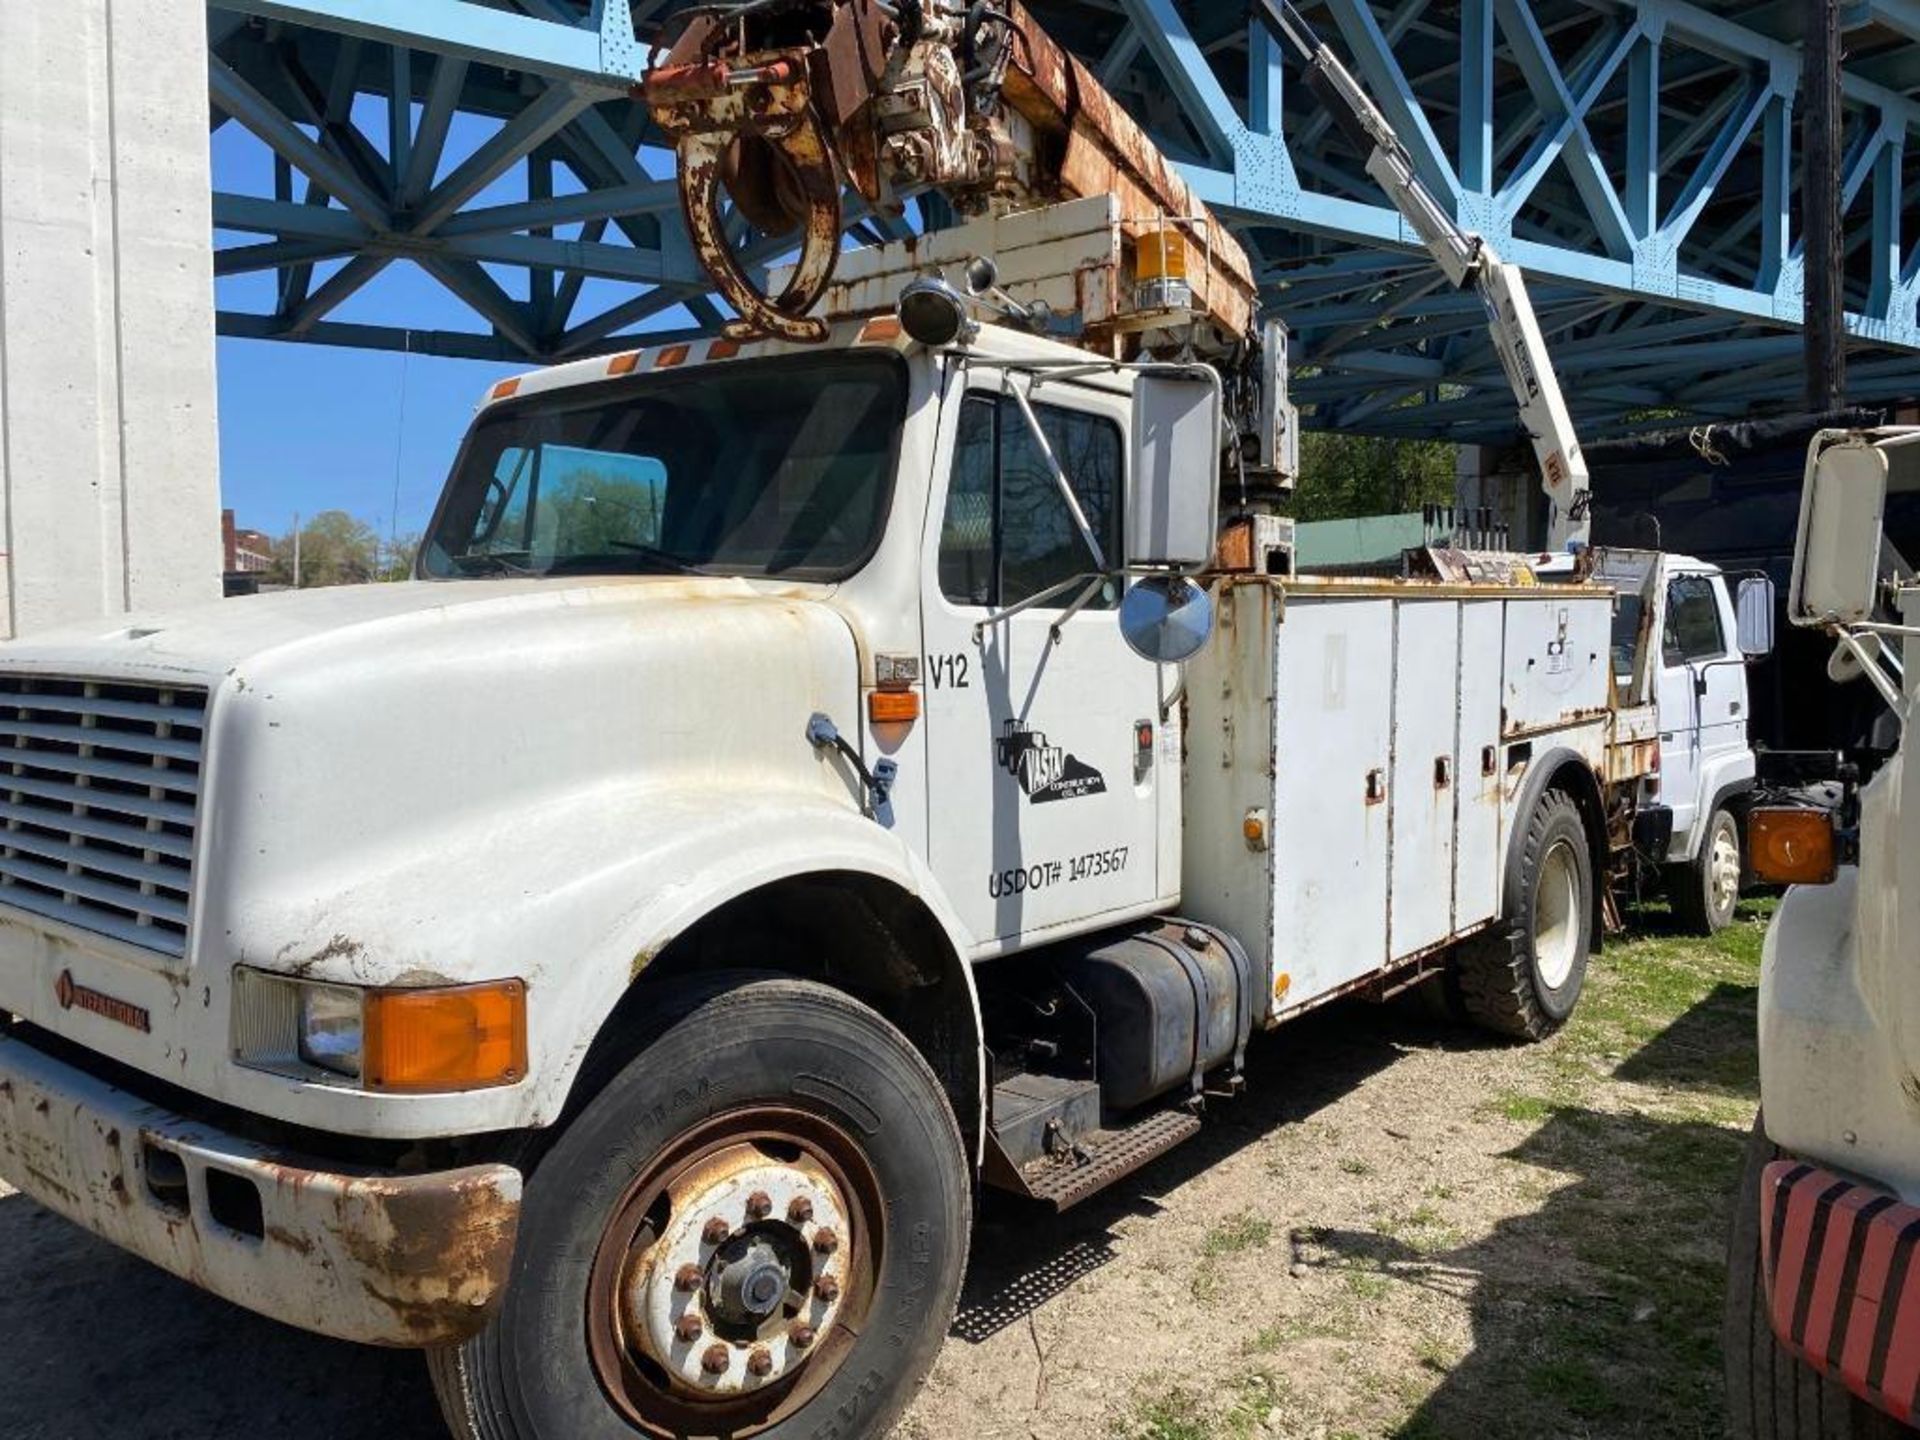 1990 International 4900 HydraLift Boom Truck (located offsite-please read full description) - Image 7 of 12